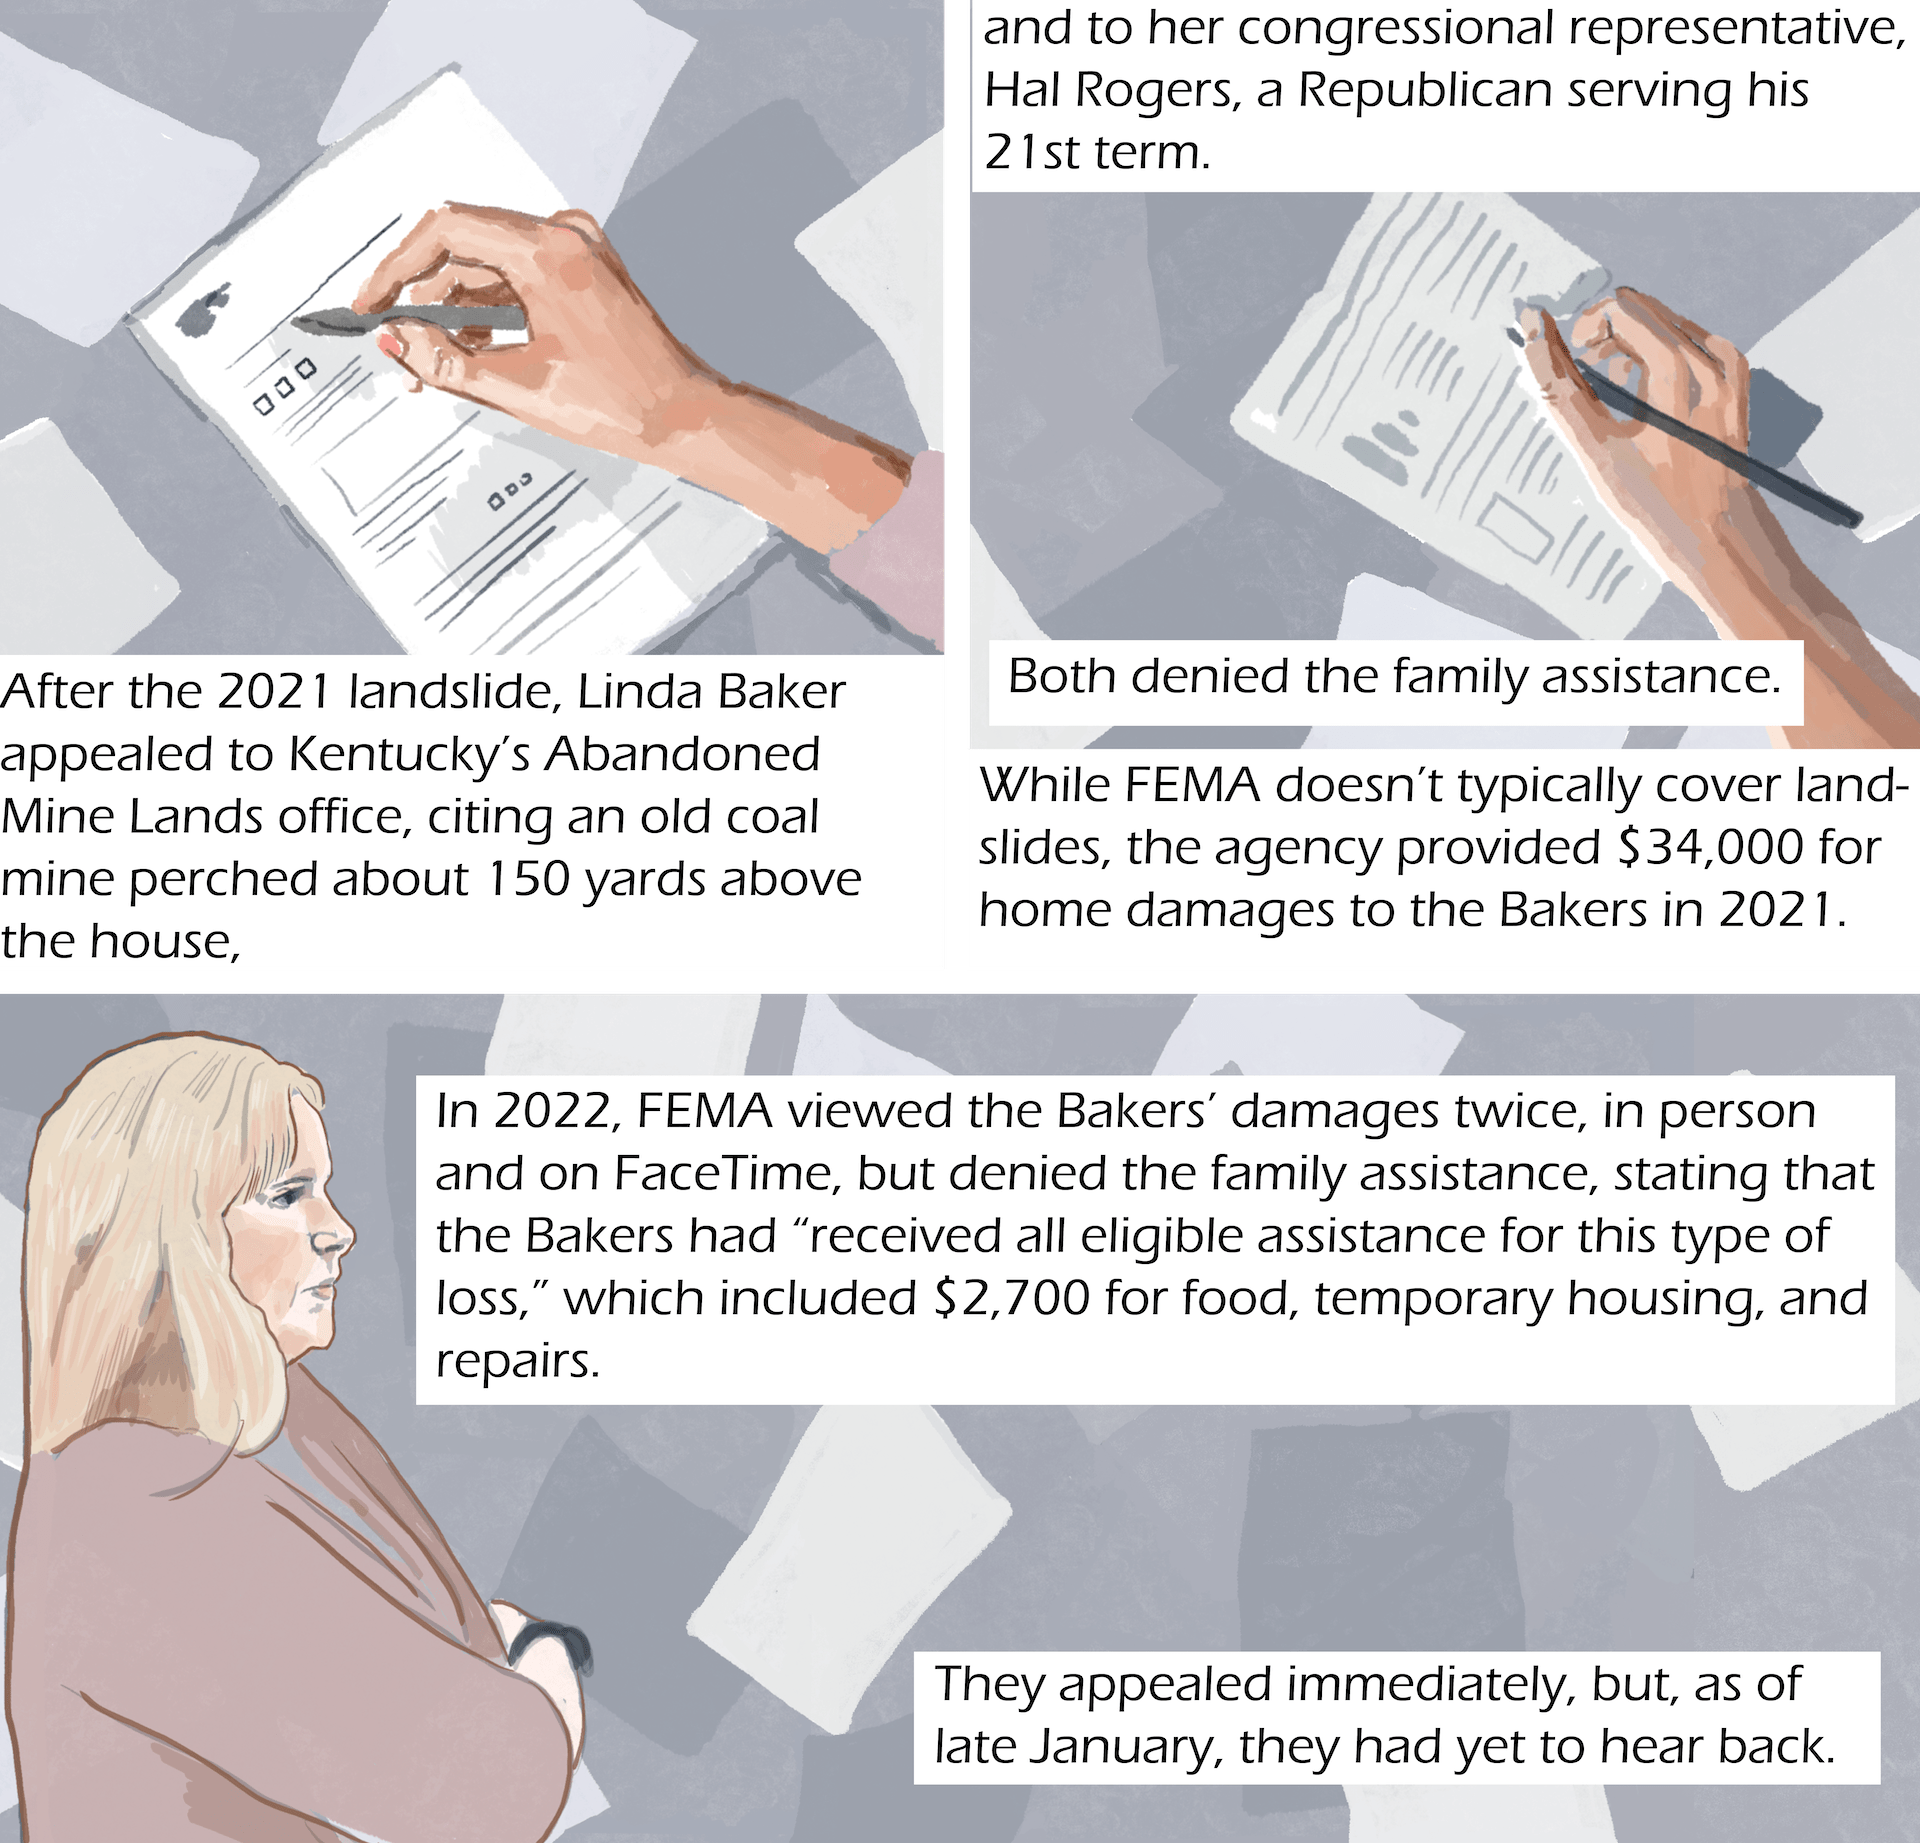 three images: The first two show hands holding a pencil and doing paperwork. The last shows a blonde woman looking over the paperwork. Text: In 2022, FEMA viewed the Bakers’ damages twice, in person and on FaceTime, but denied the family assistance, stating that the Bakers had “received all eligible assistance for this type of loss,” which included $2,700 for food, temporary housing, and repairs. They appealed immediately, but, as of late January, they had yet to hear back. After the 2021 landslide, Linda Baker appealed to Kentucky’s Abandoned Mine Lands office, citing an old coal mine perched about 150 yards above the house, and to her congressional representative, Hal Rogers, a Republican serving his 21st term. Both denied the family assistance. While FEMA doesn’t typically cover landslides, the agency provided $34,000 for home damages to the Bakers in 2021.